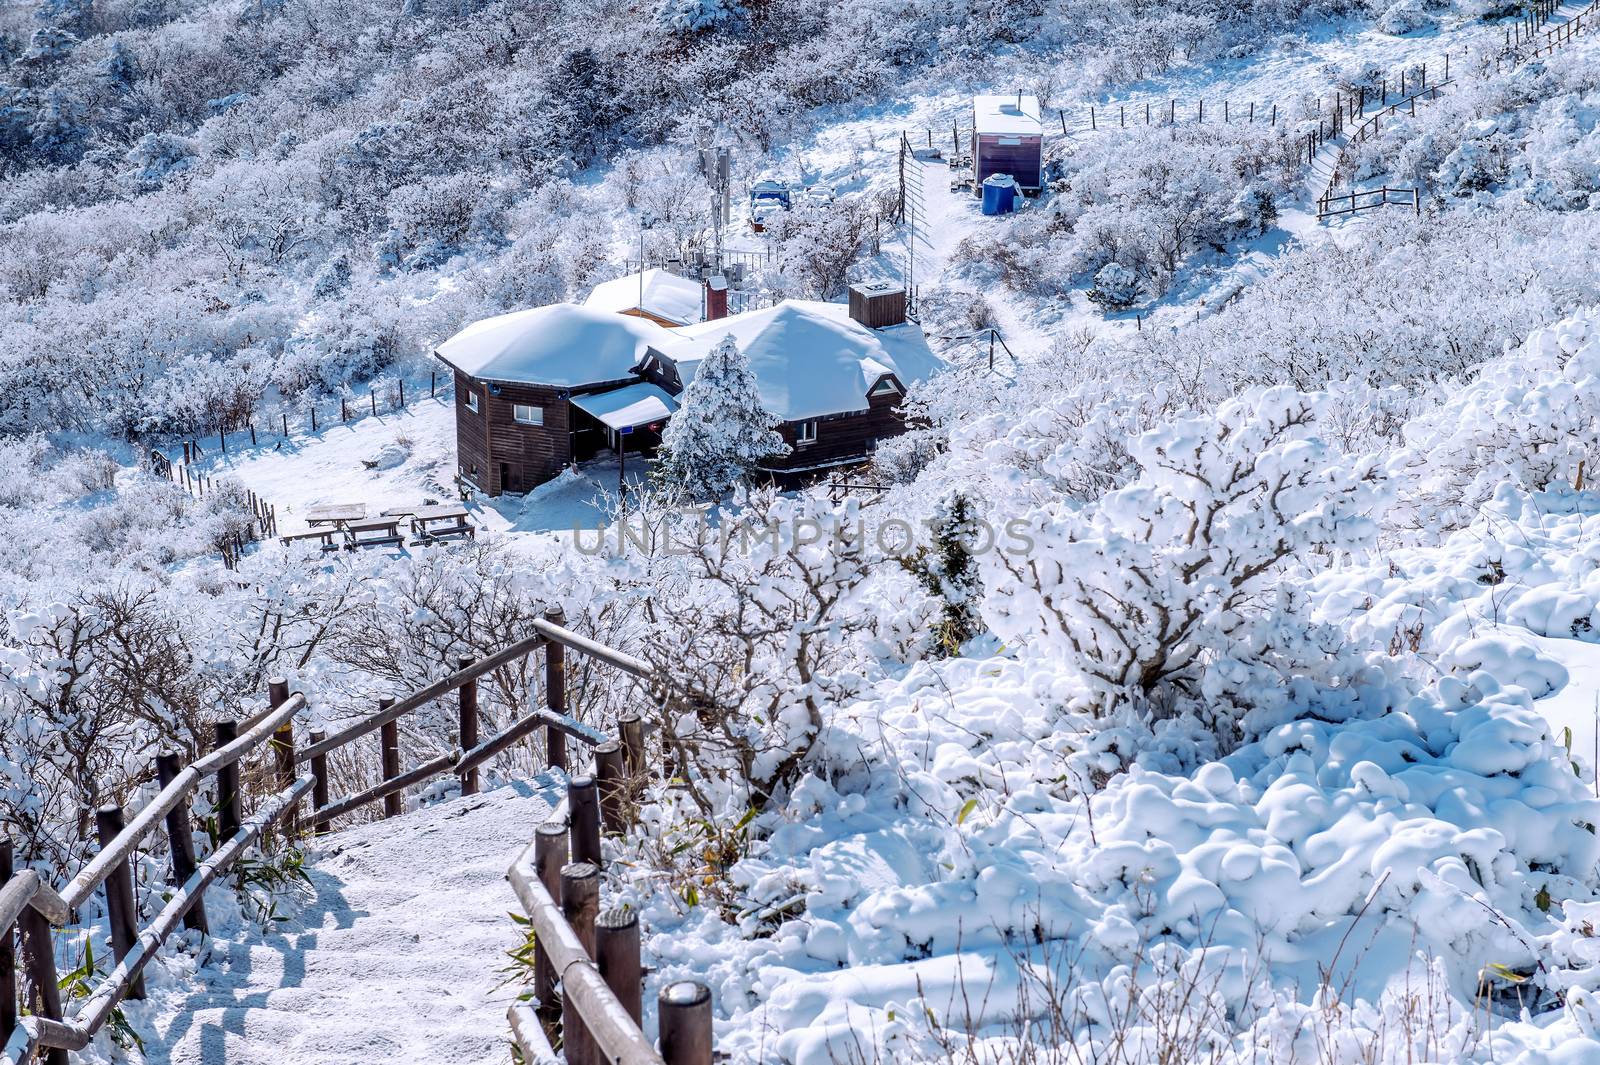 Deogyusan mountains is covered by snow in winter,South Korea. by gutarphotoghaphy